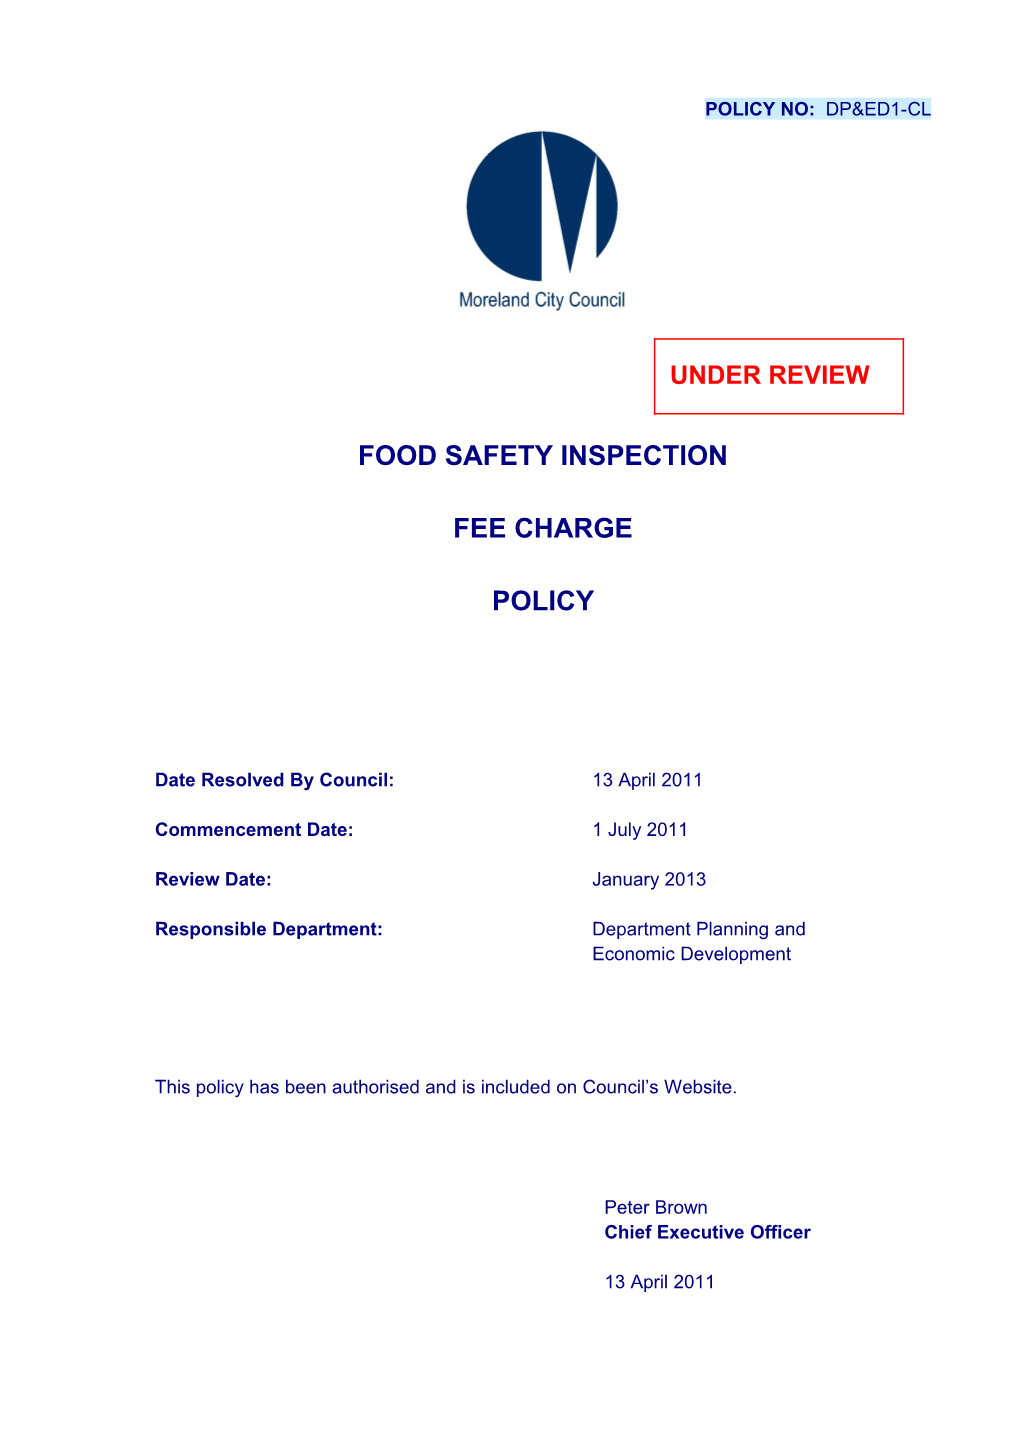 Food Safety Inspection